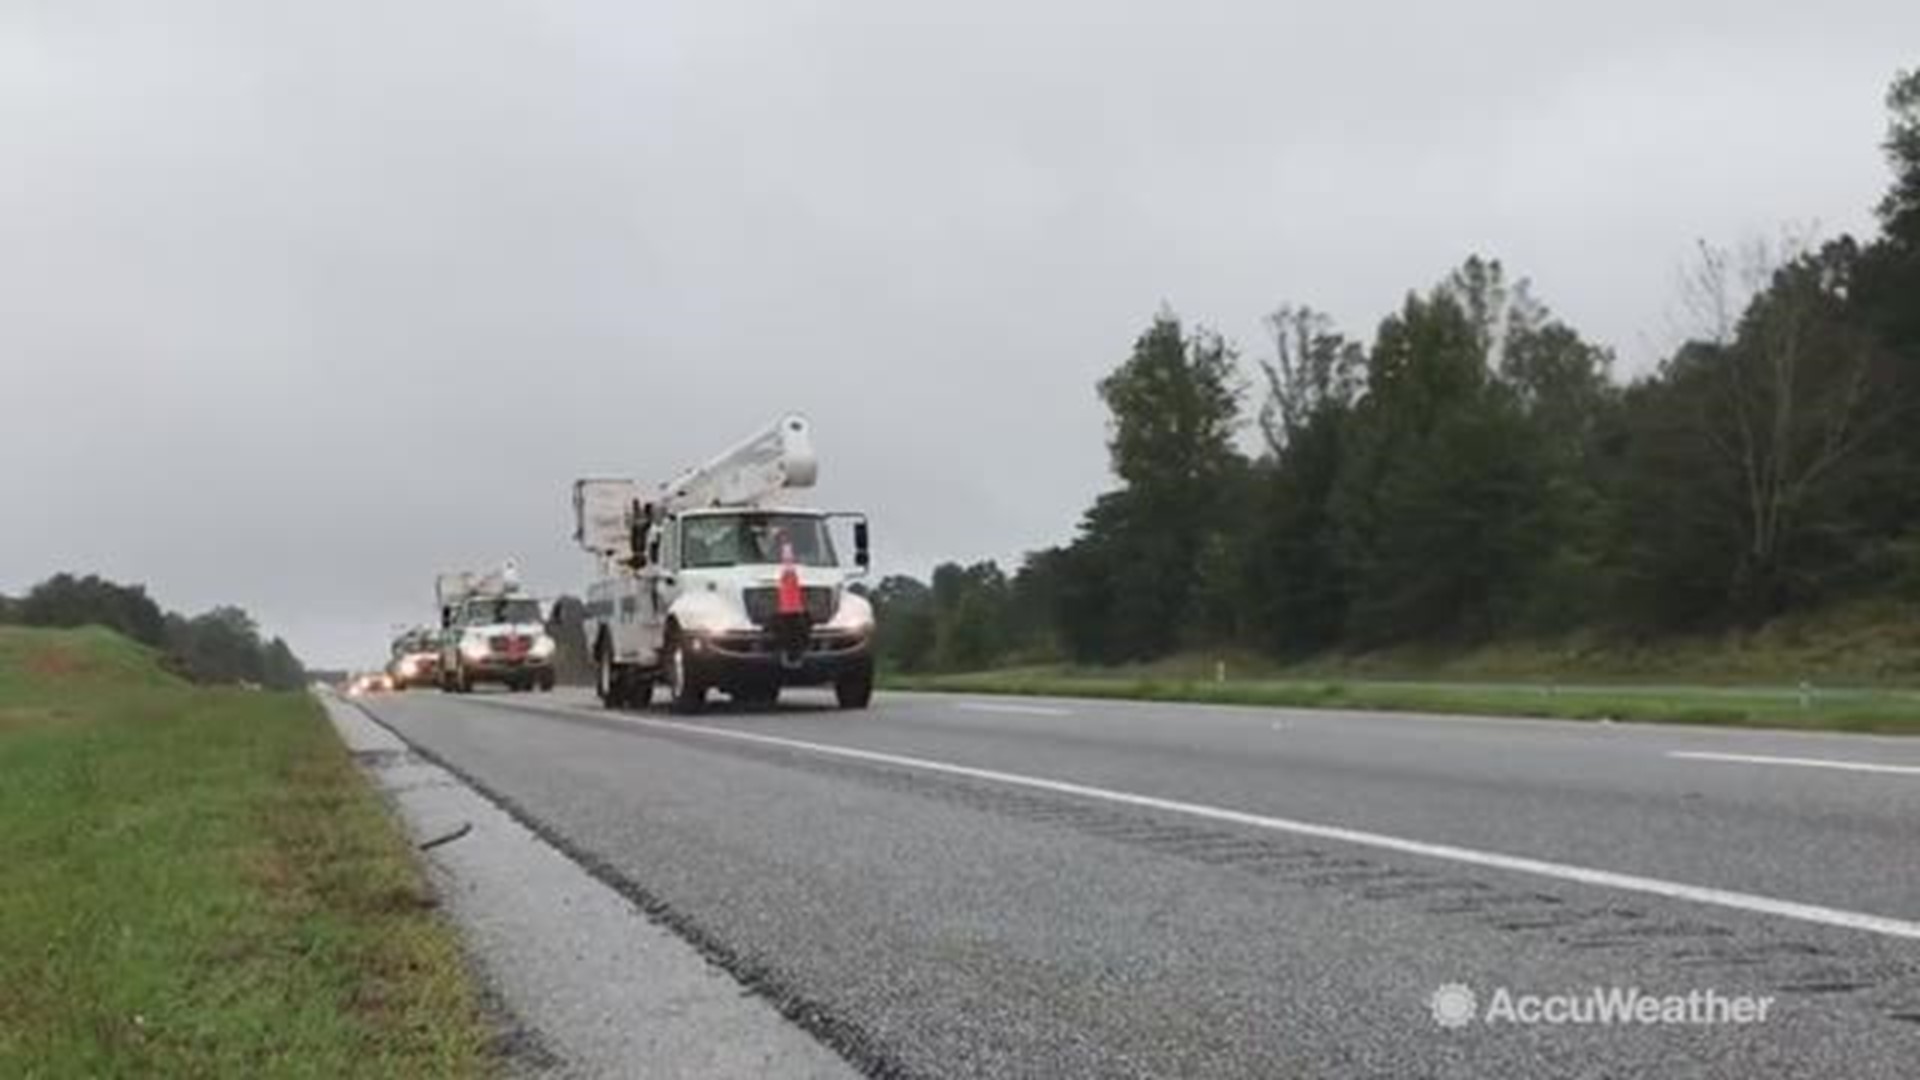 Power crews are seen here crossing state lines form North Carolina to South Carolina as they plan for power outages as Hurricane Michael barrels toward the Florida Panhandle.